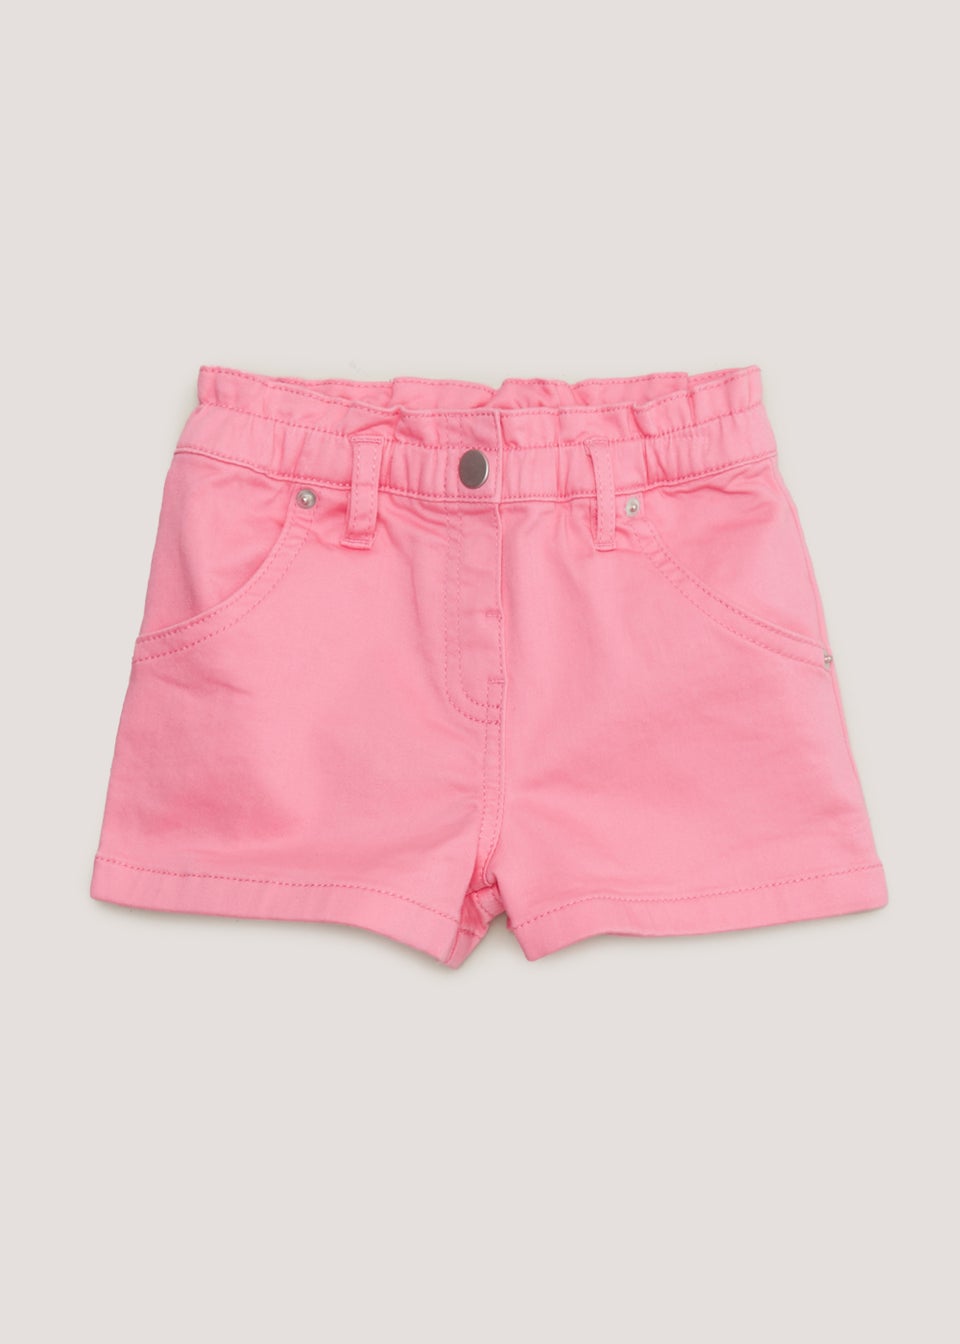 Pop of pink shorts